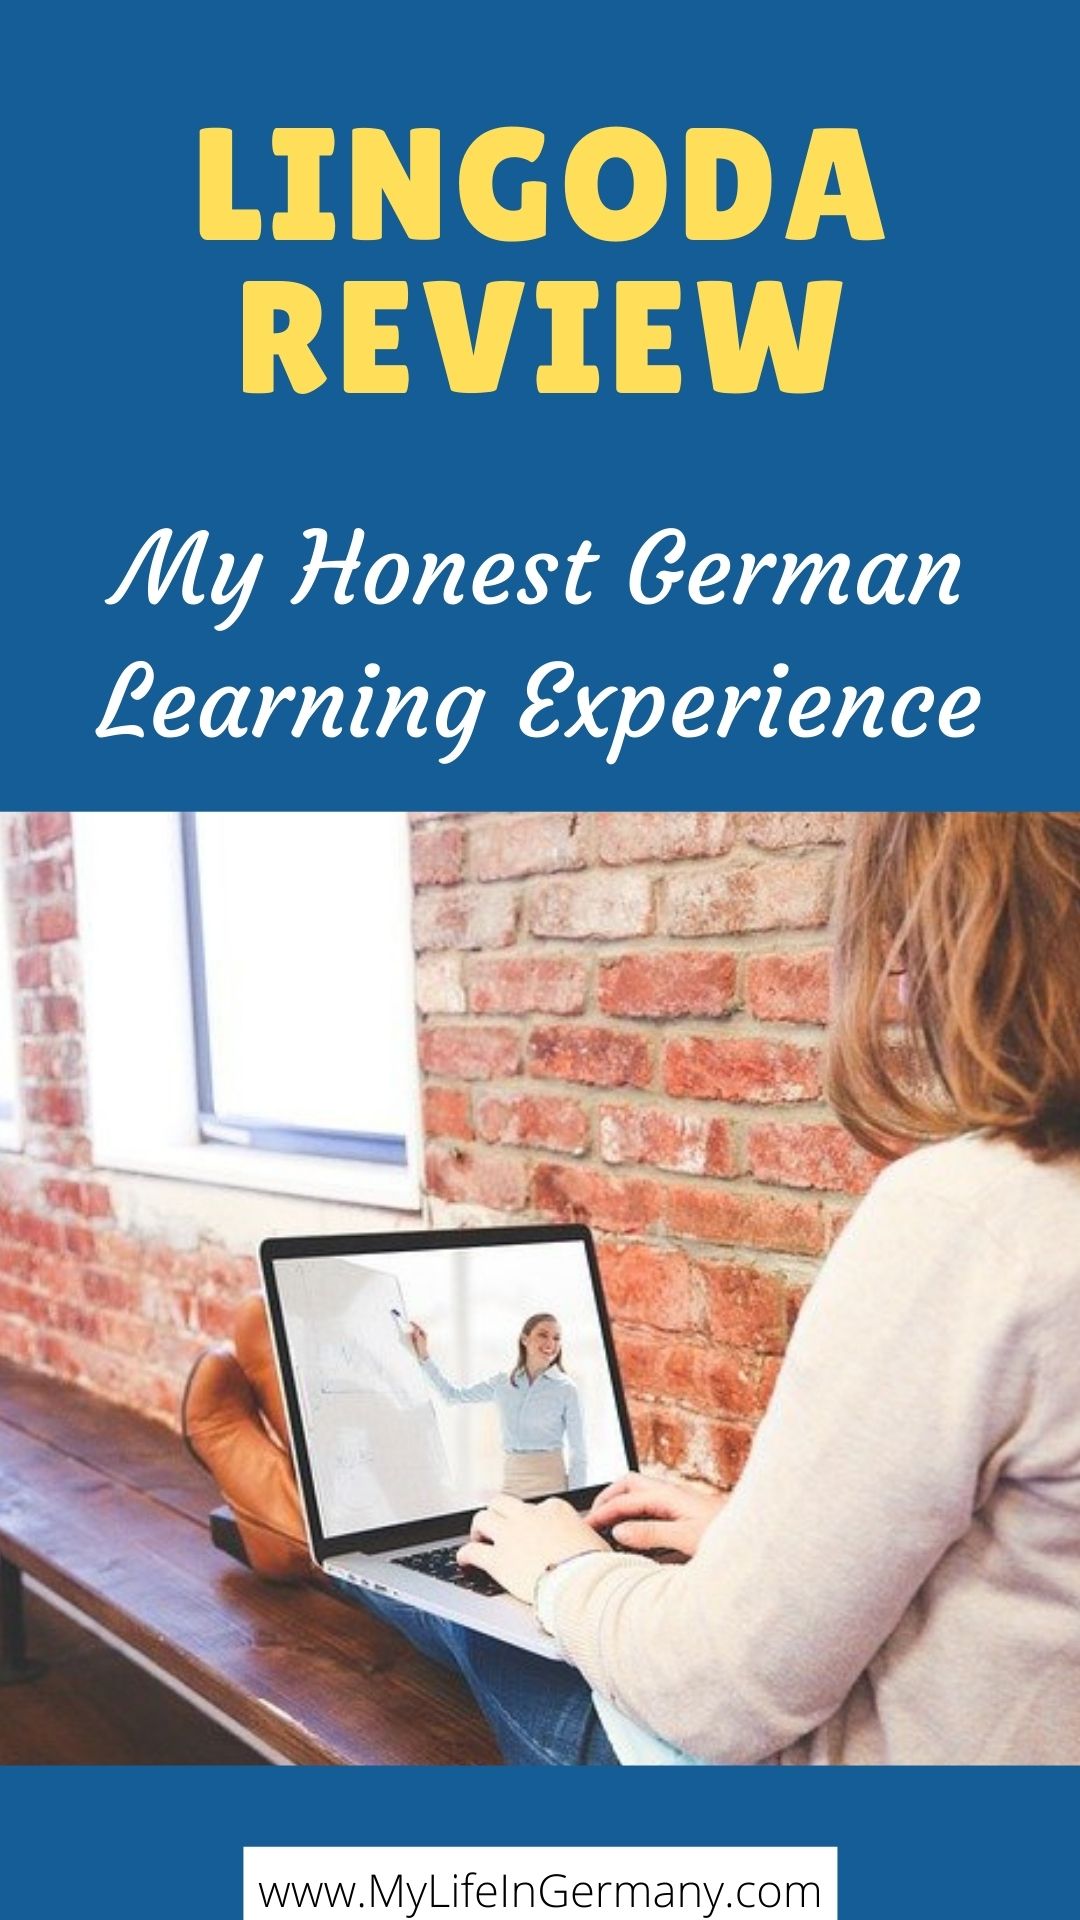 pinterest edited_Lingoda Review - My honest German learning experience_my life in germany_hkwomanabroad